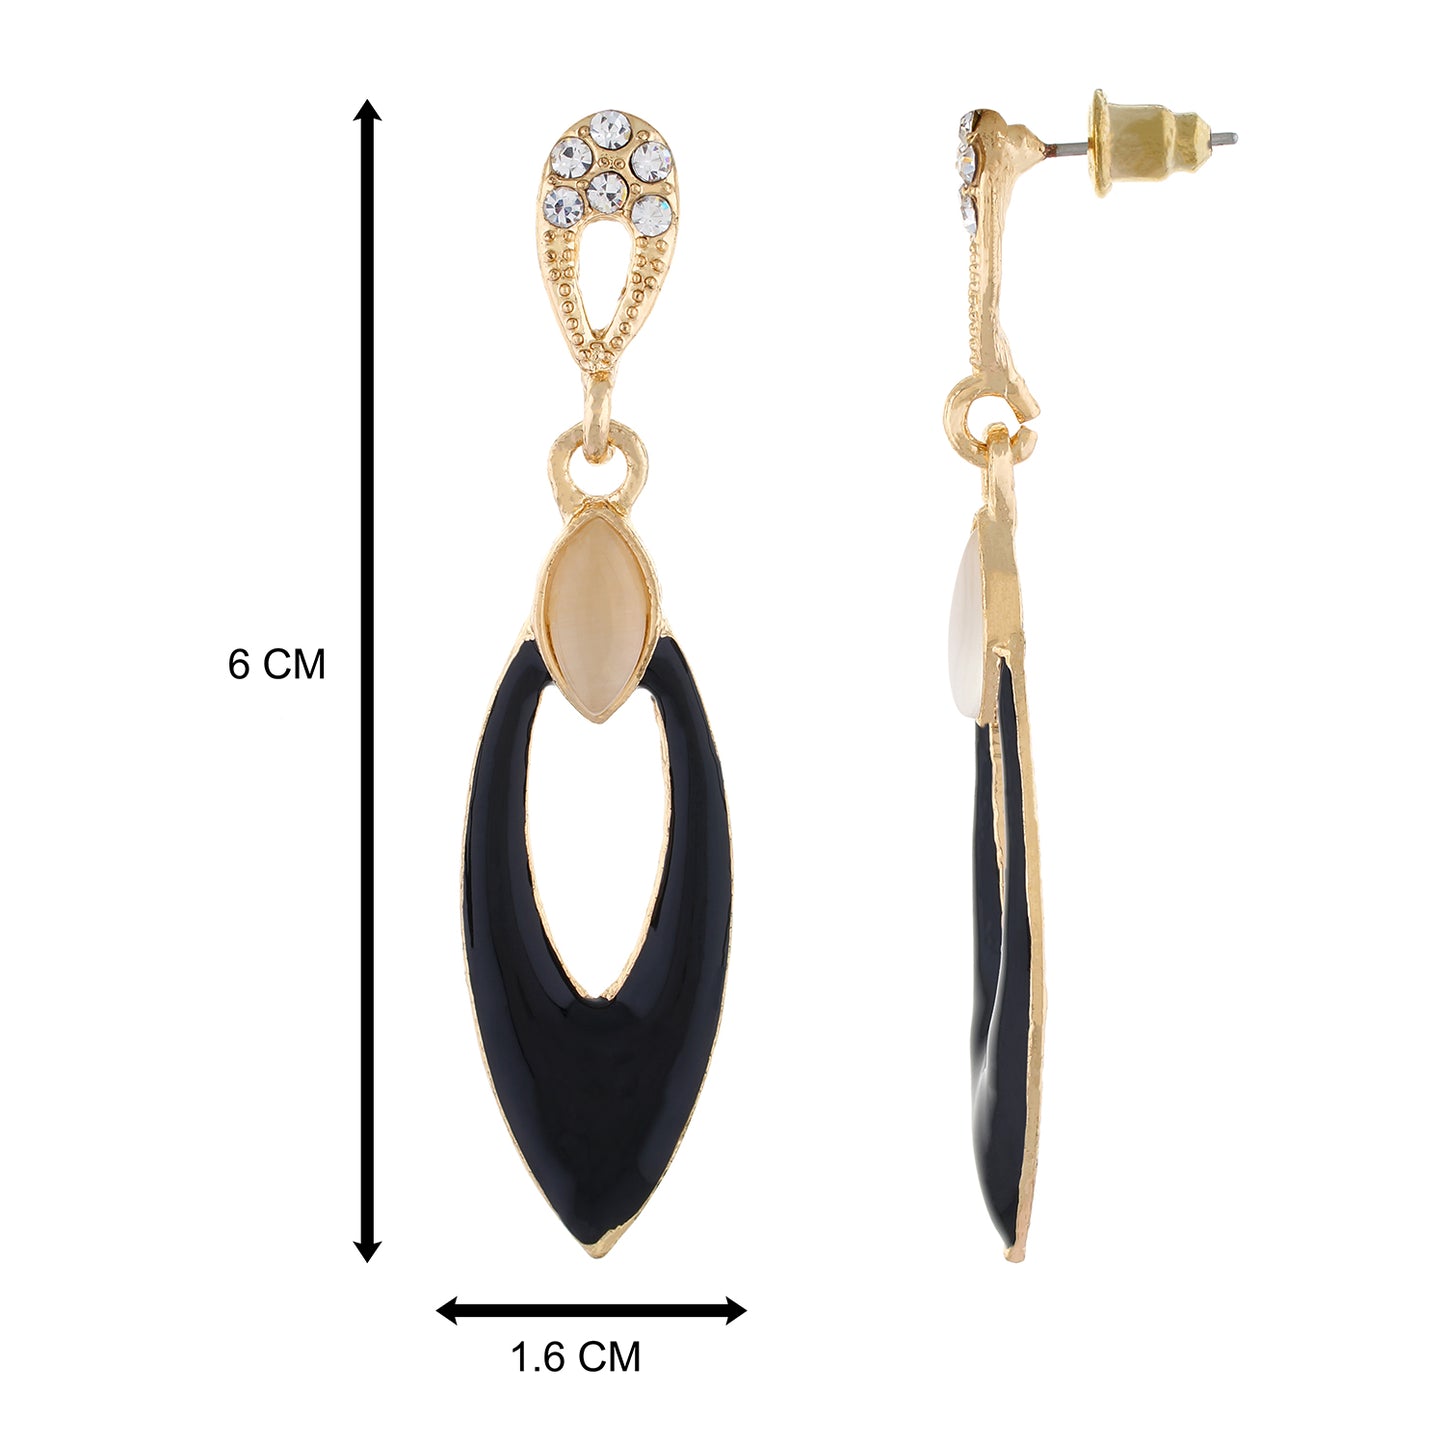 Black colour Oval Design Hanging Earrings for Girls and Women